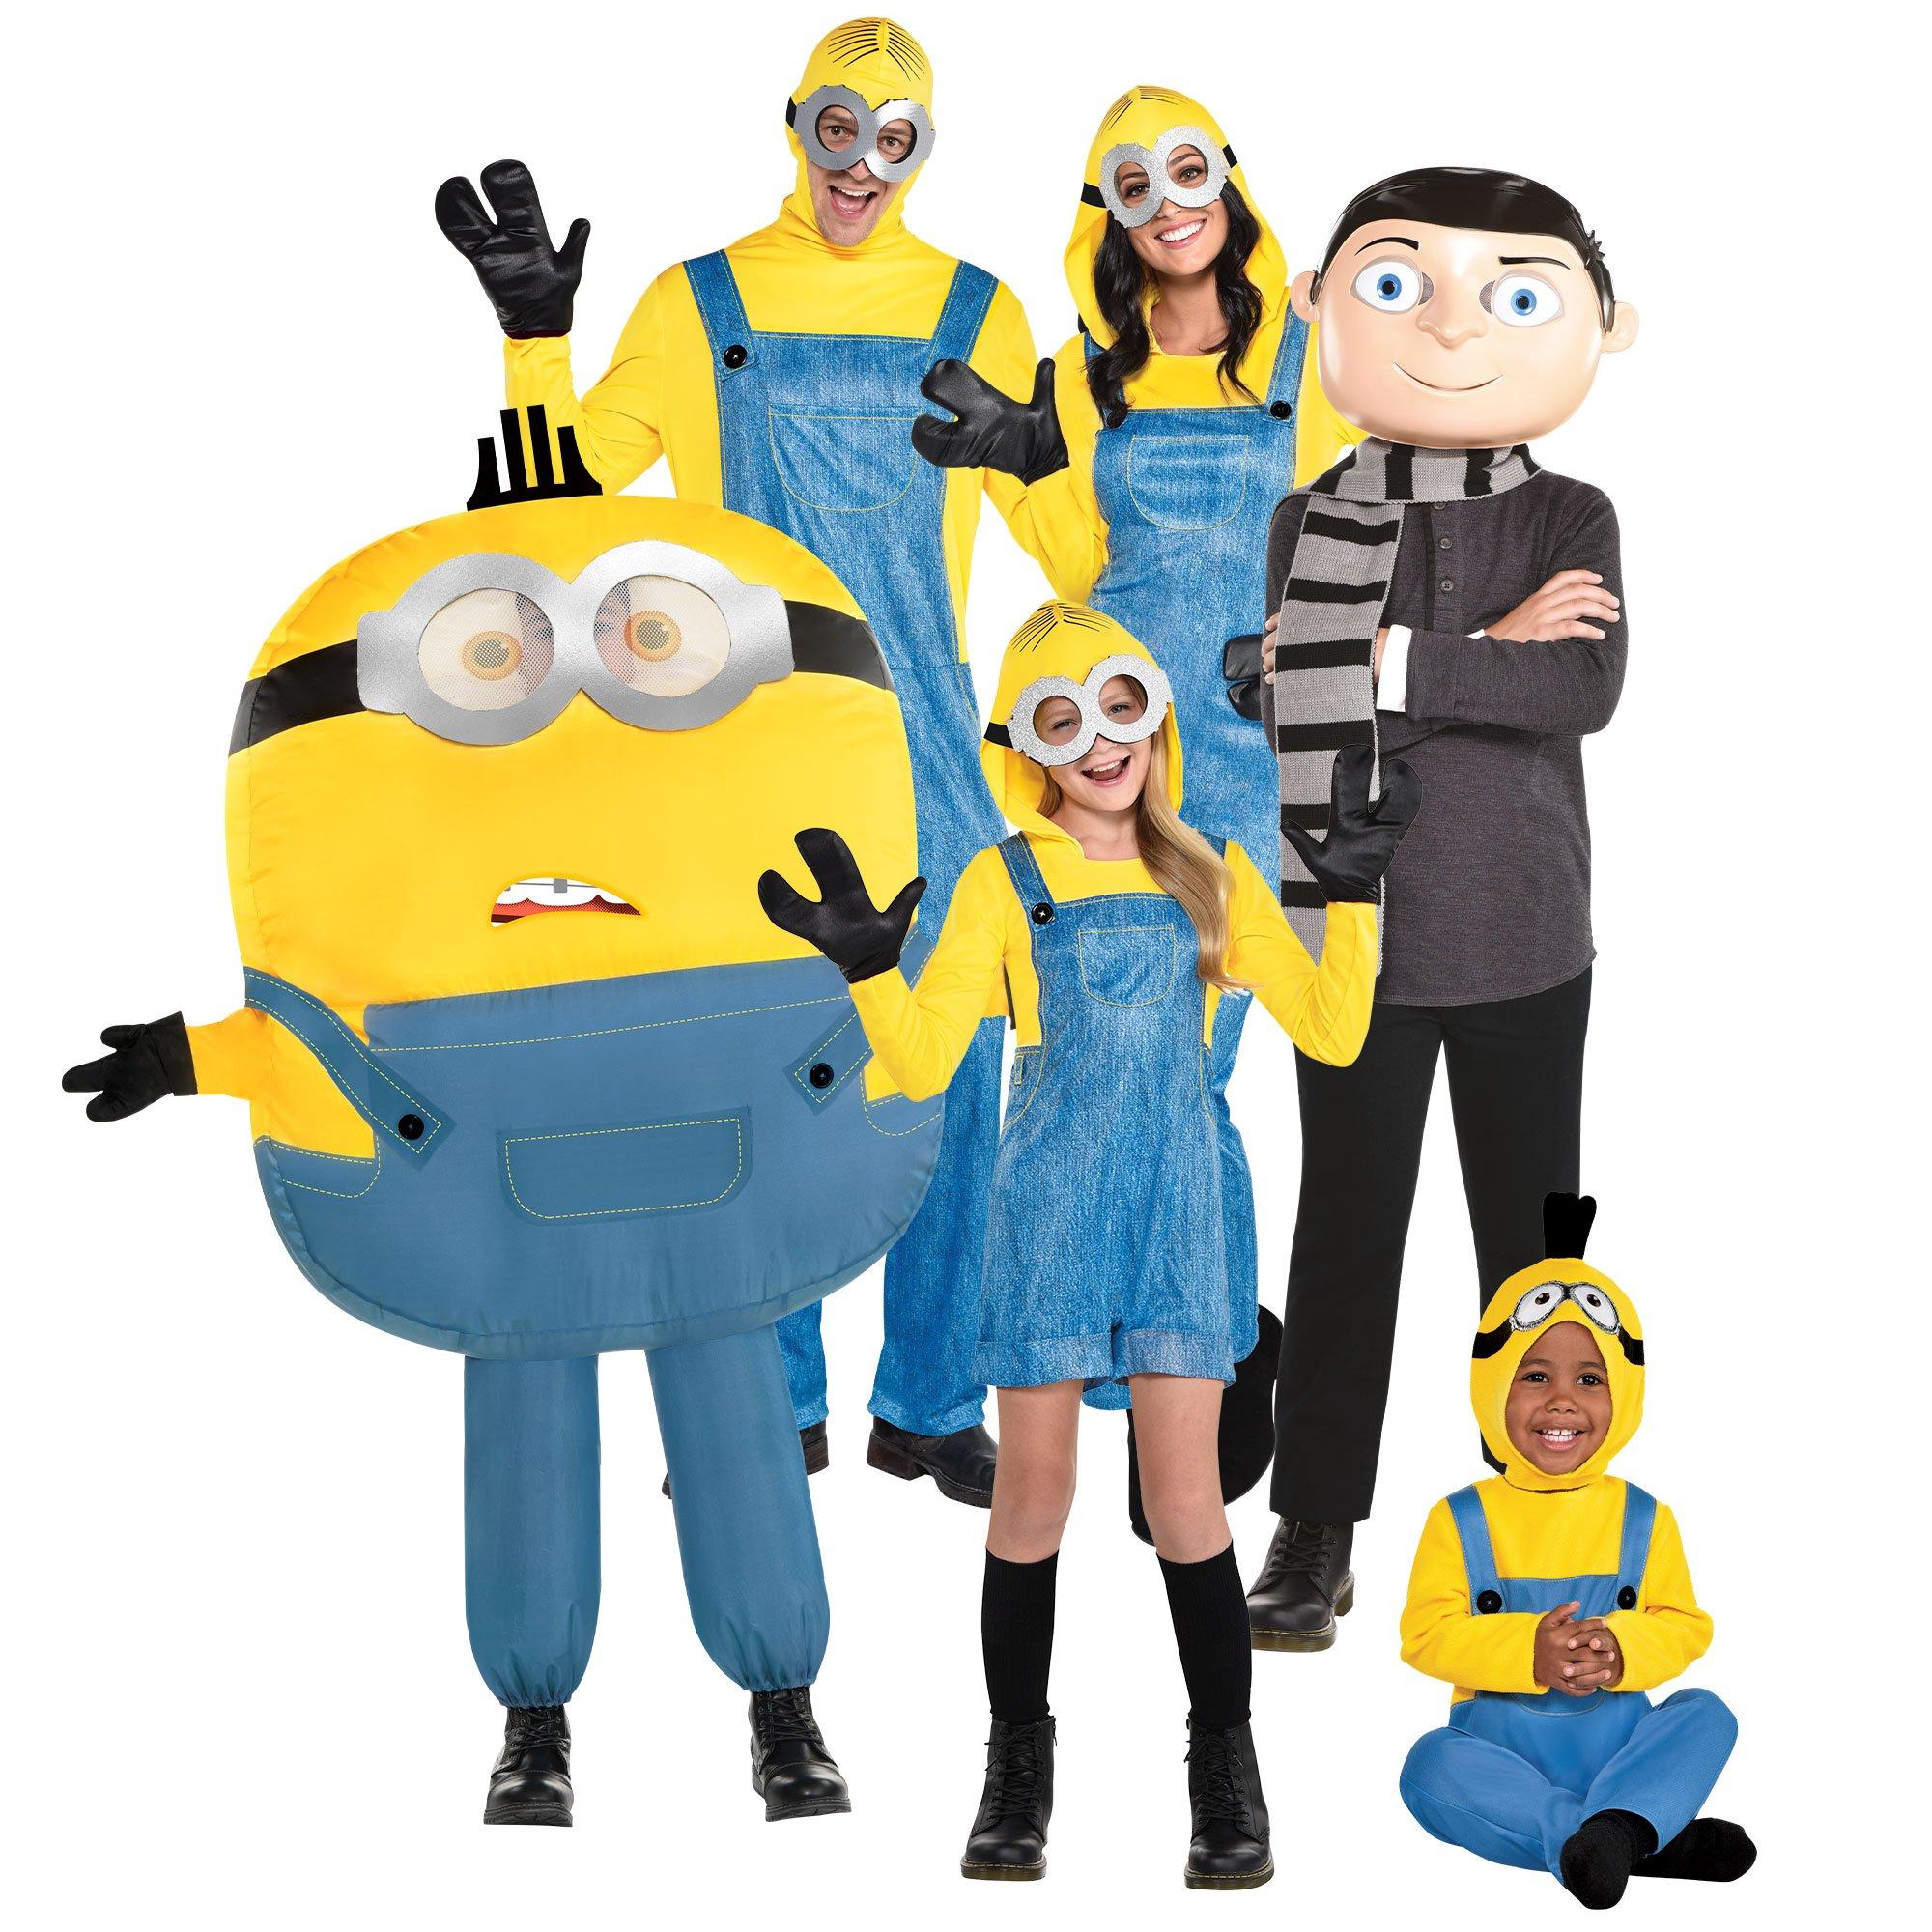 Adult Woman's DESPICABLE ME MINION COSTUME with Accessories